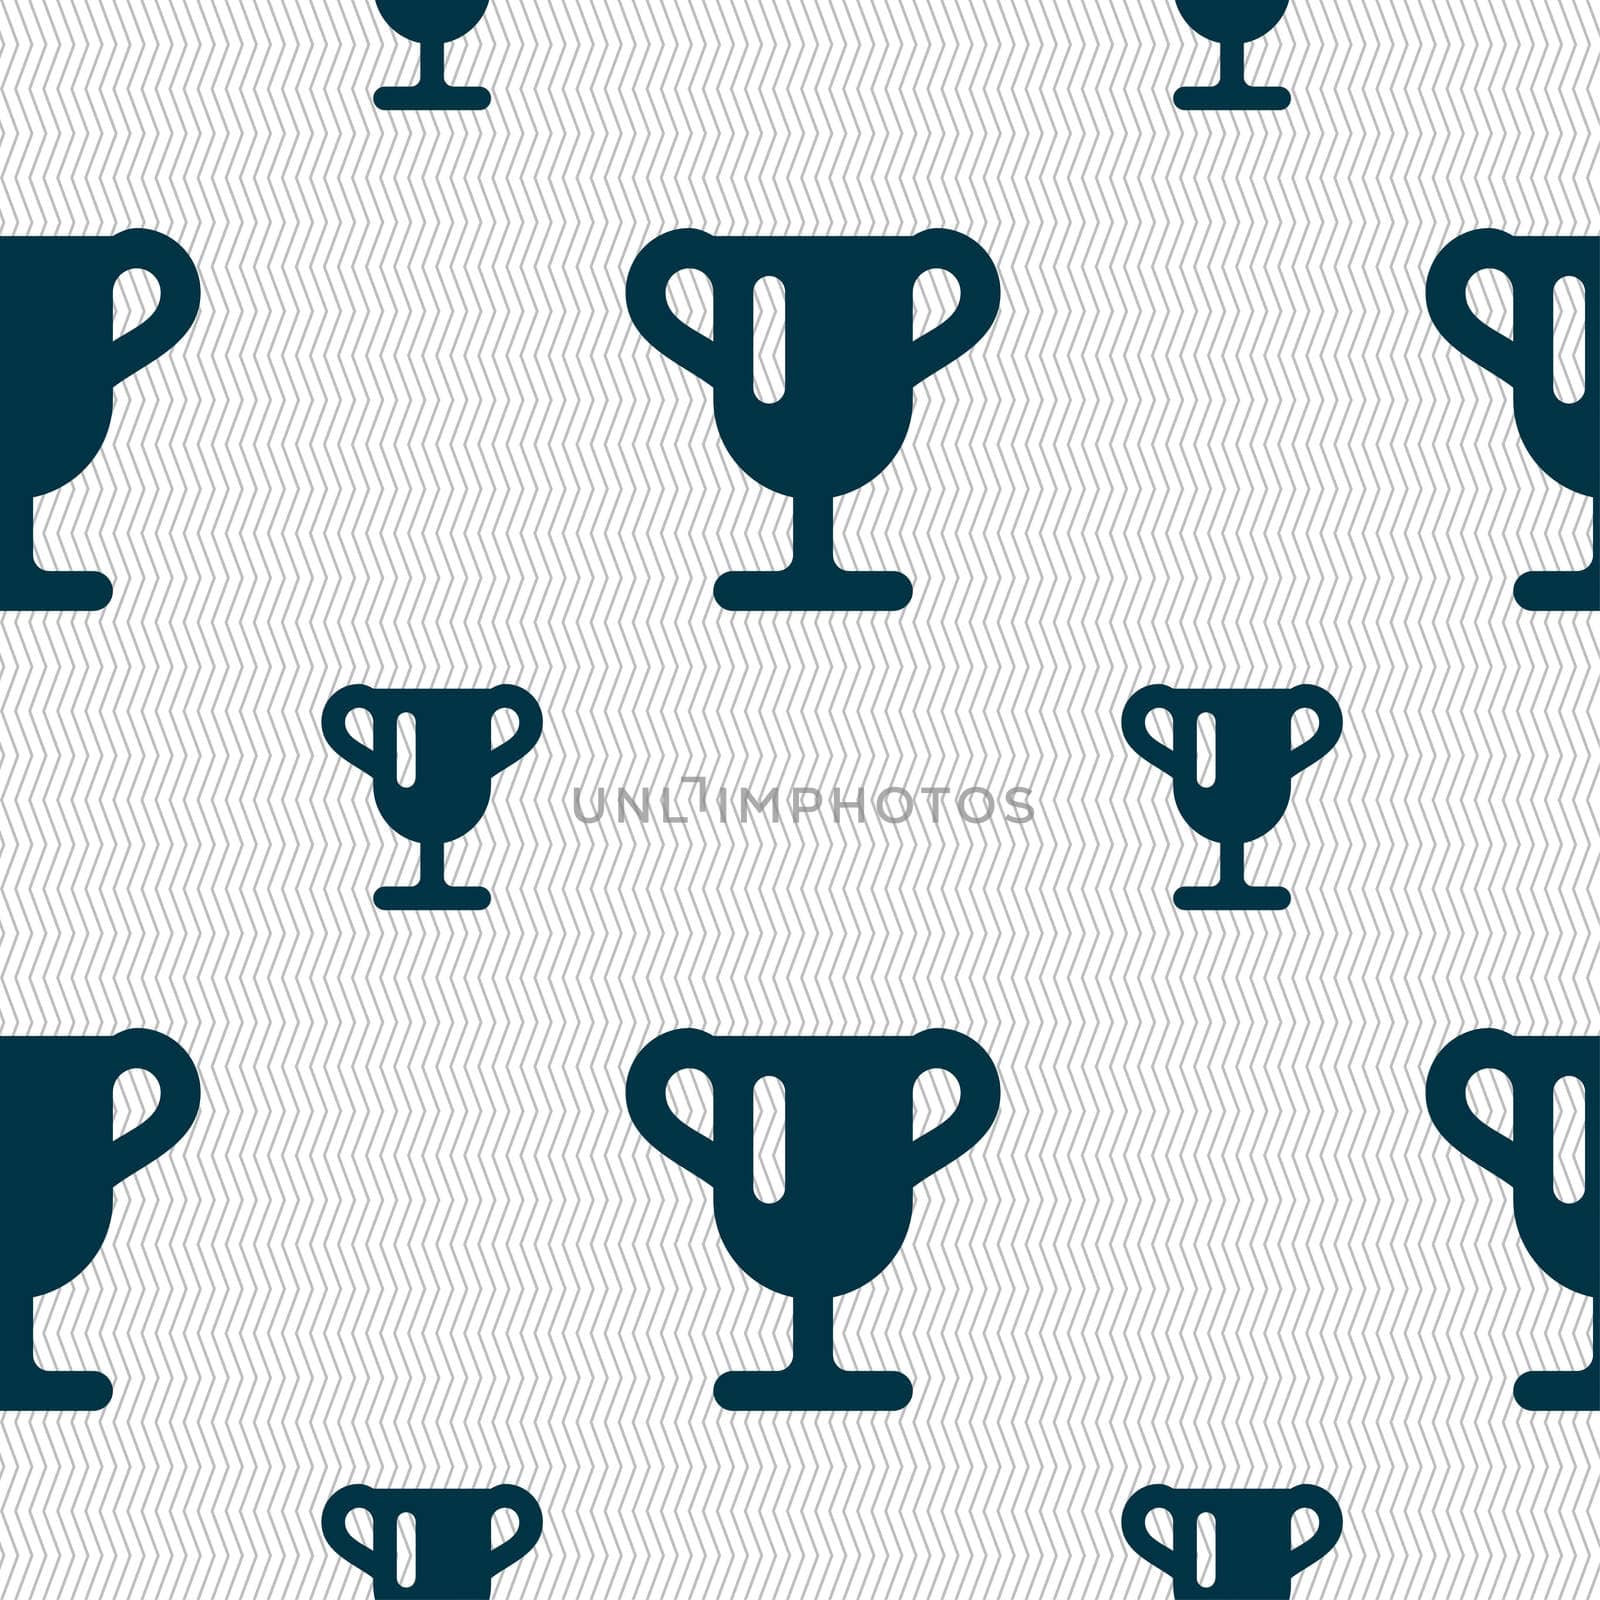 Winner cup, Awarding of winners, Trophy icon sign. Seamless pattern with geometric texture. illustration